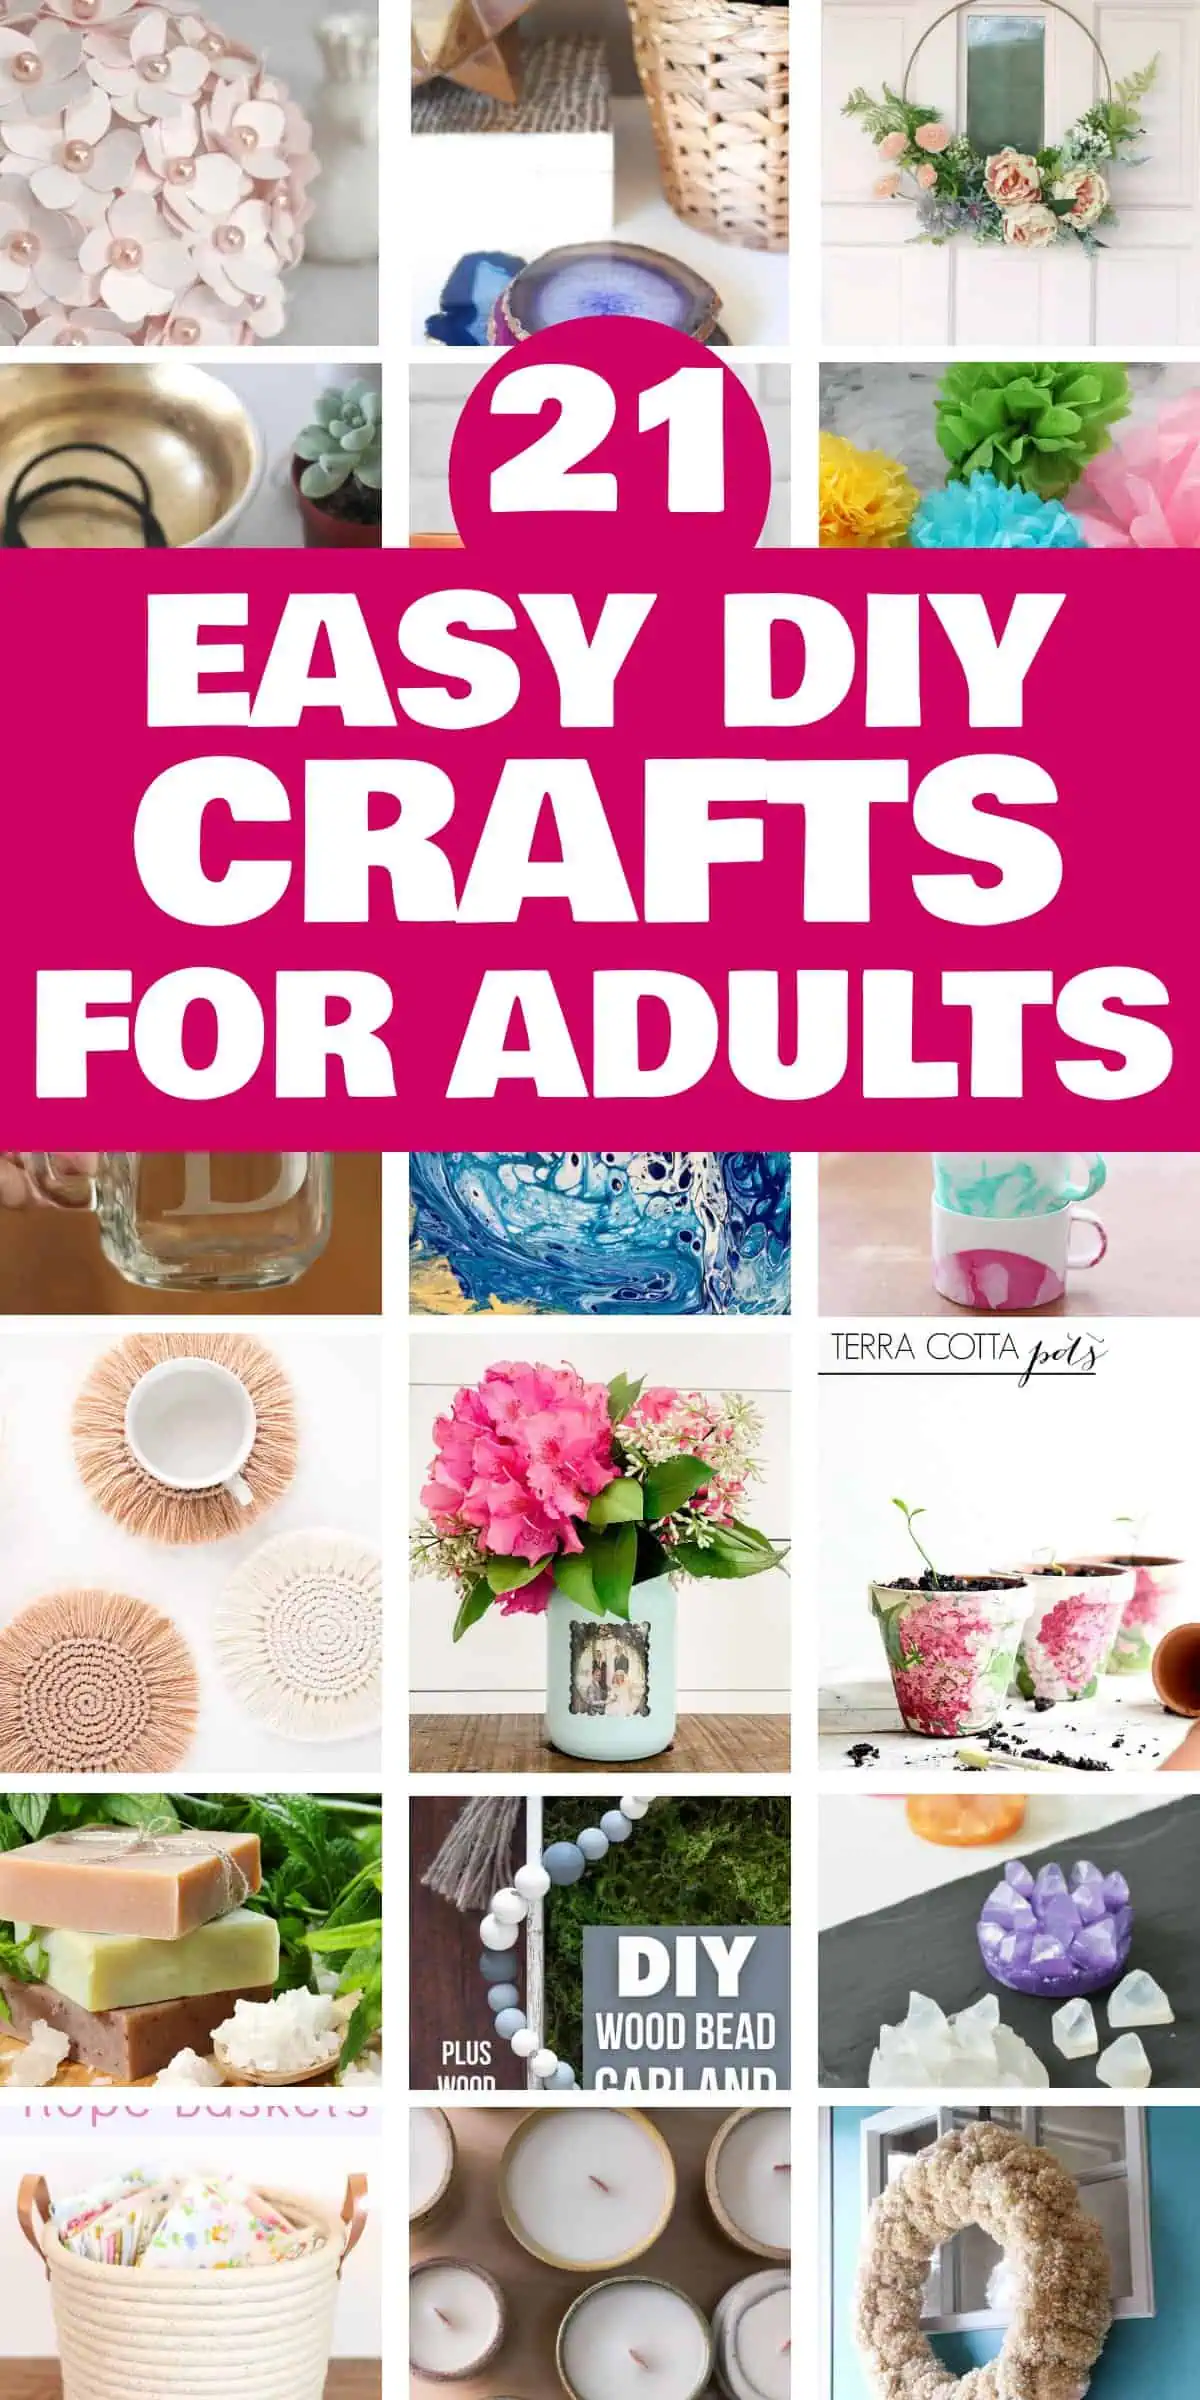 21 Easy DIY Crafts For Adults